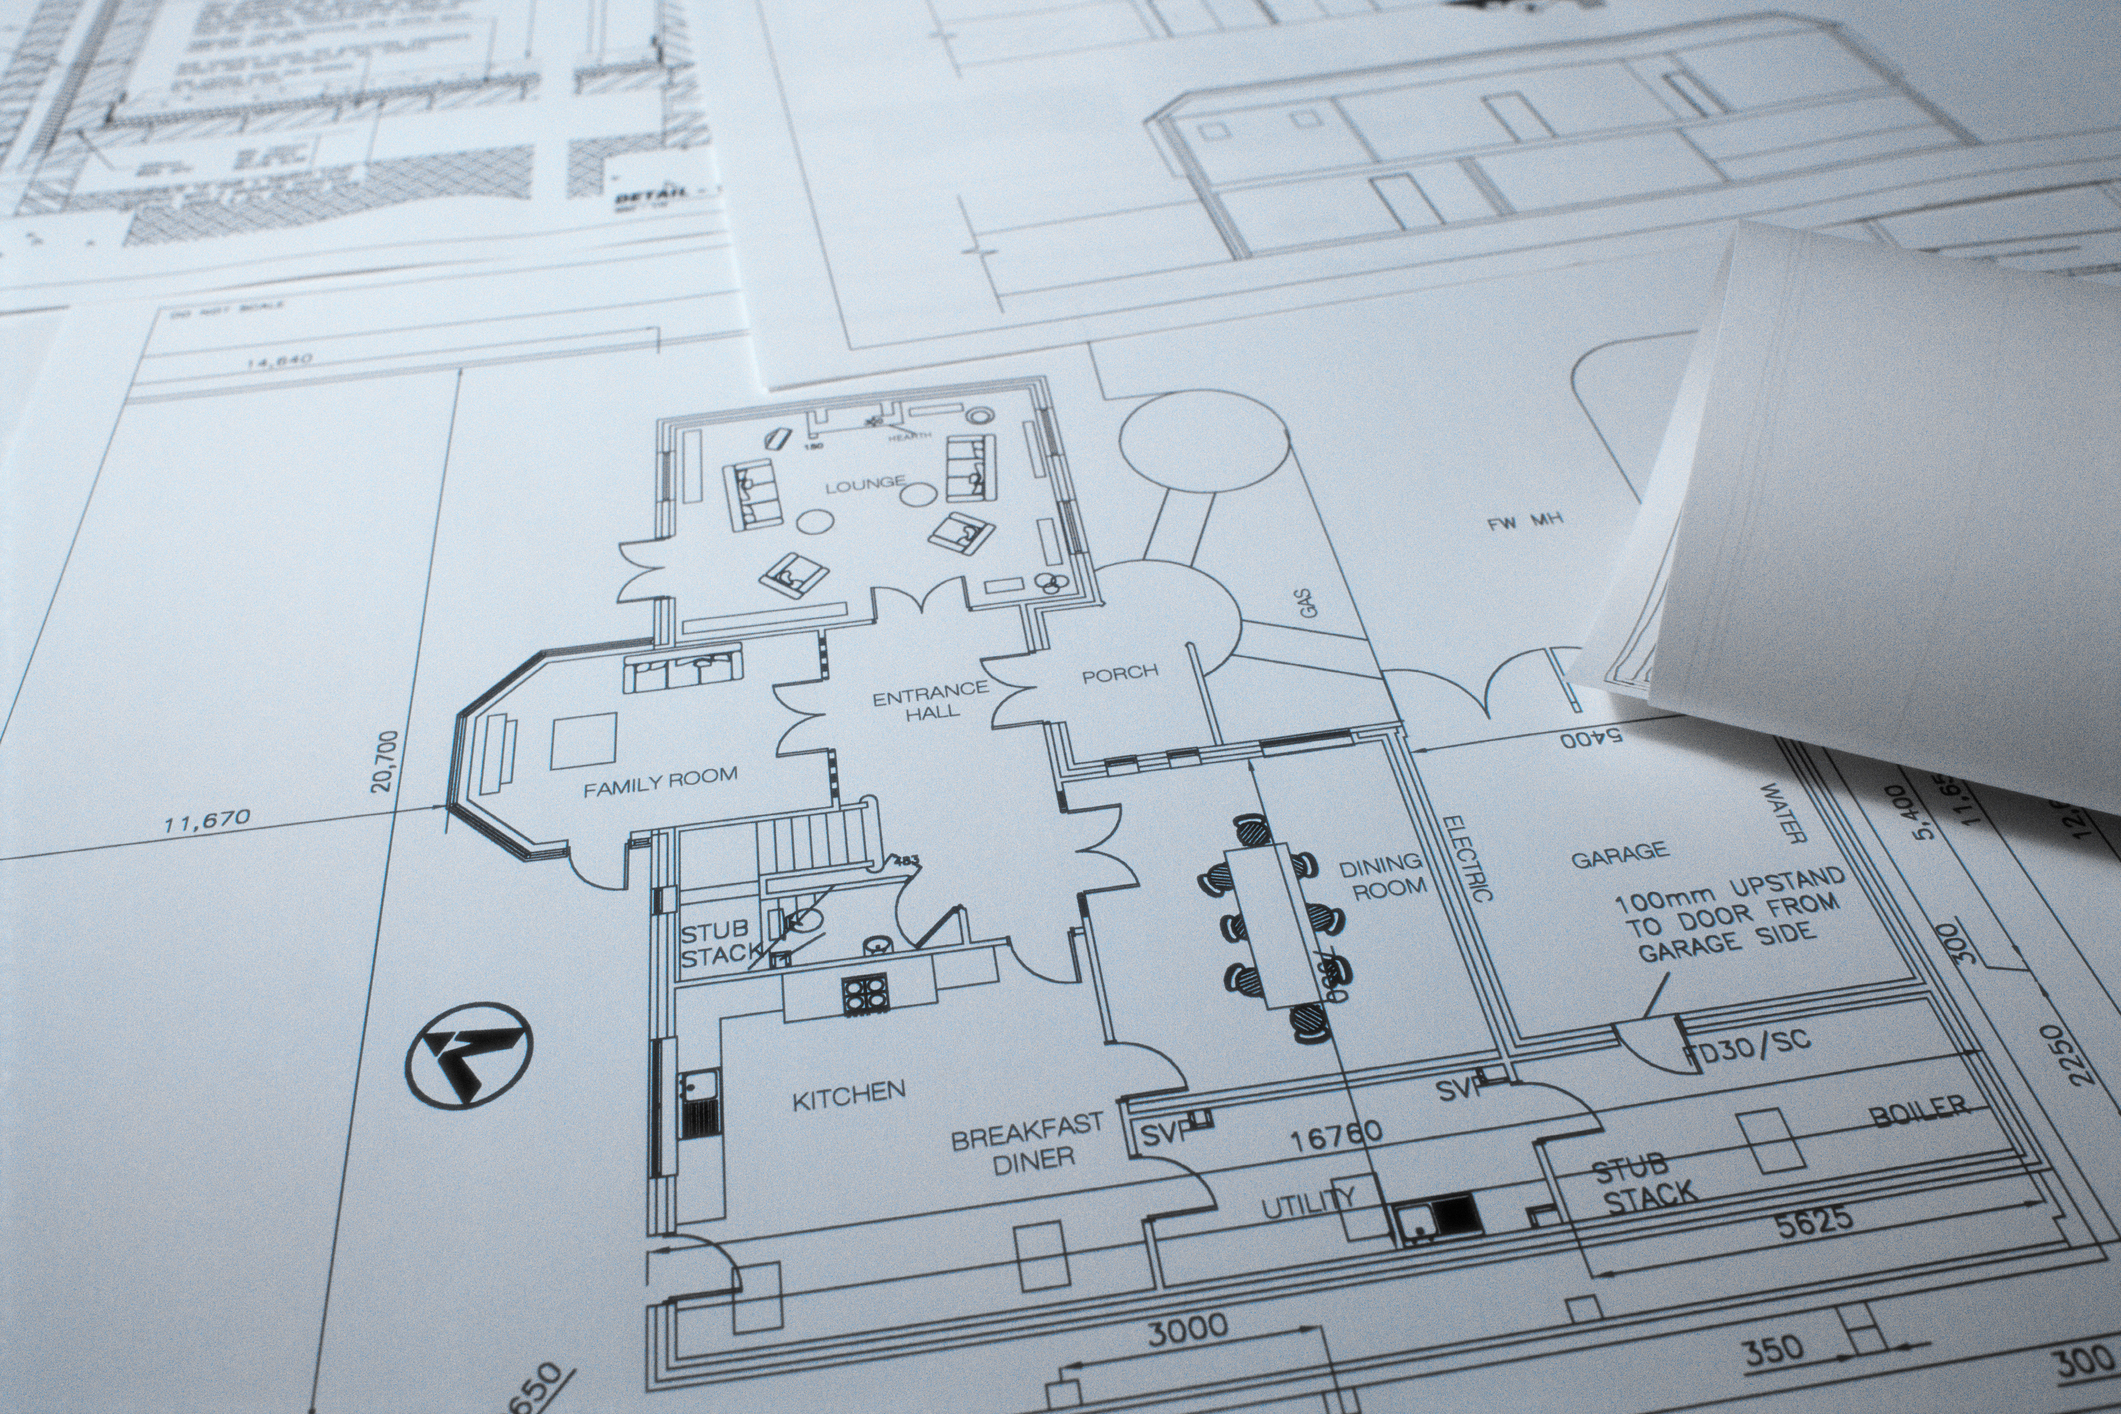 Architectural blueprints with detailed floor plan layouts for a residential house